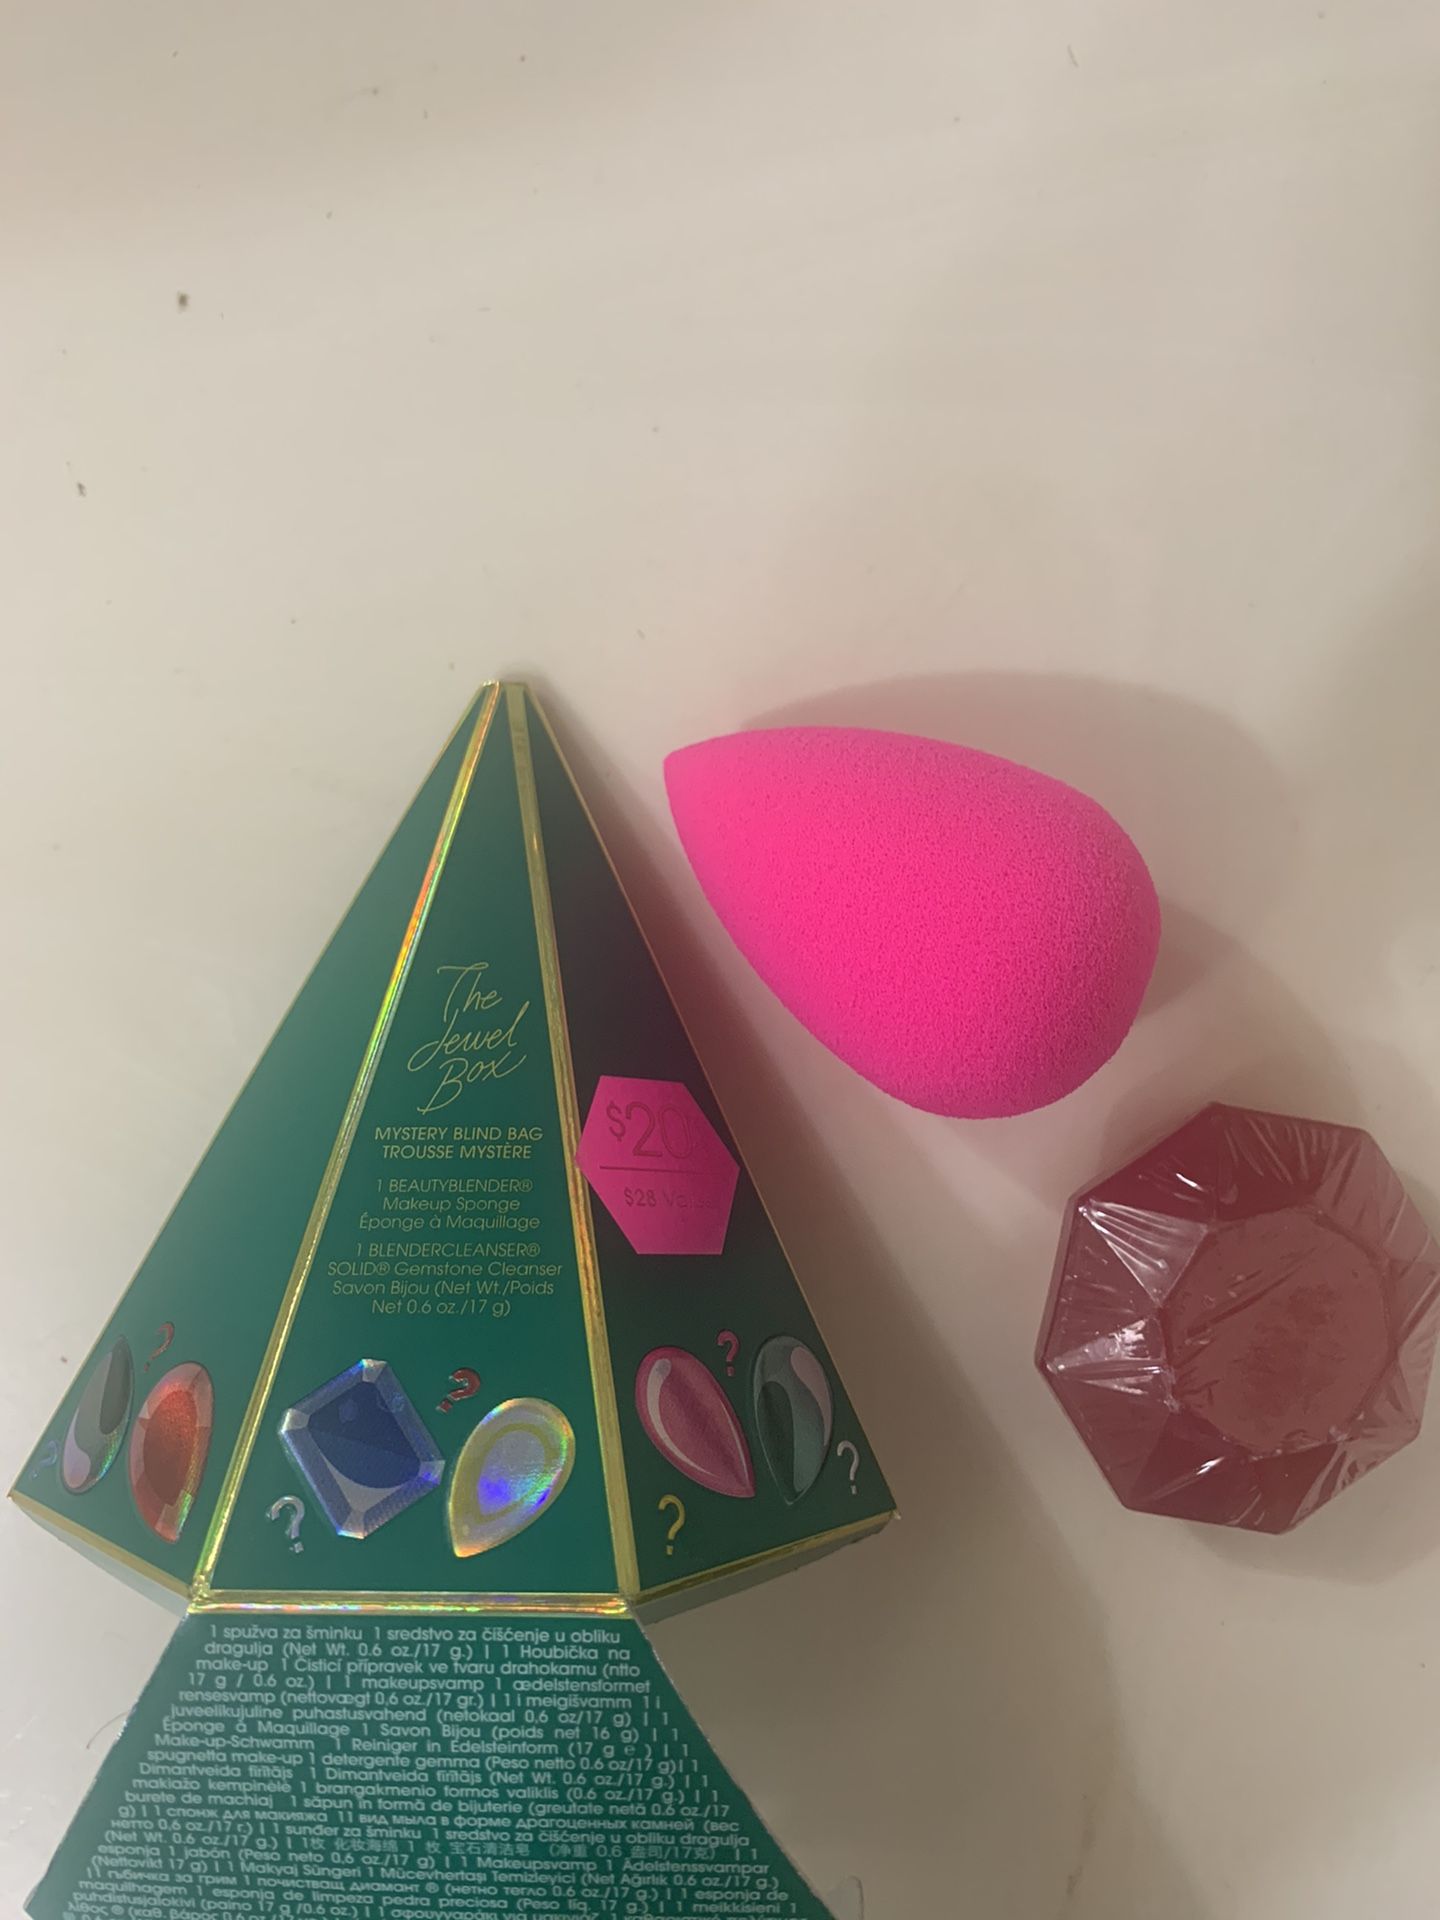 Beauty blender and beauty cleanser - new in box $17